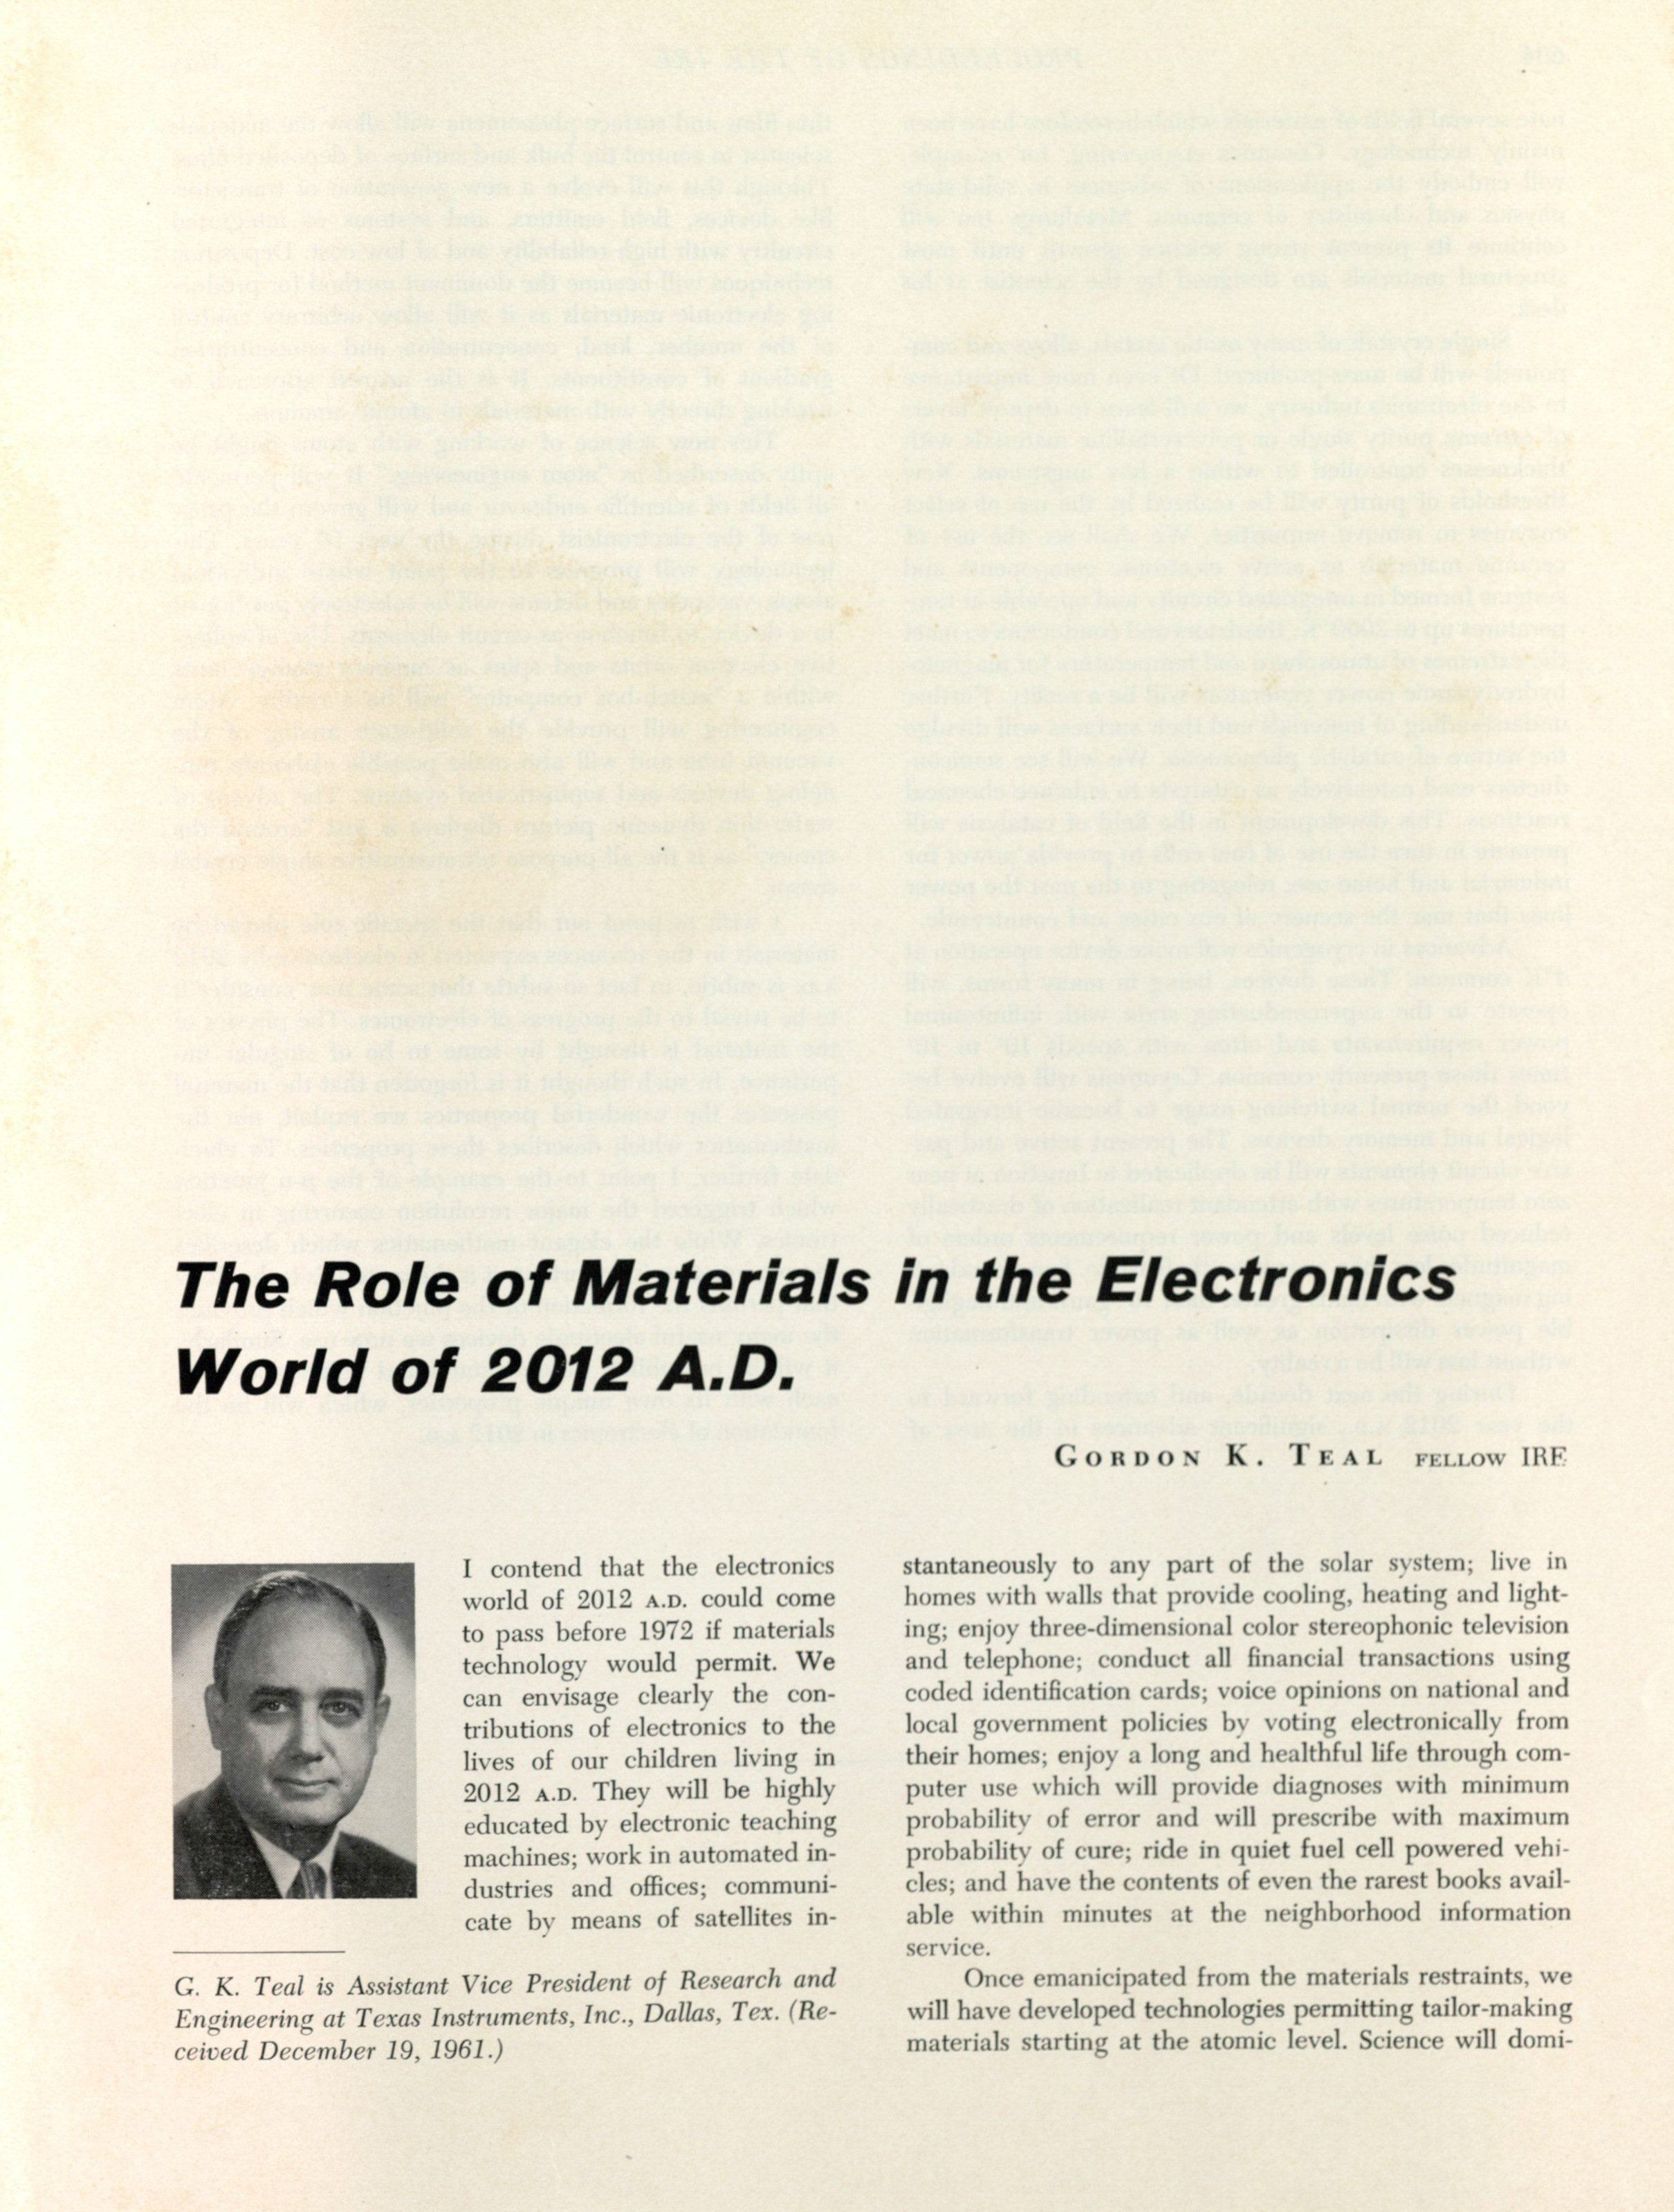 Gordon Kidd Teal: "The Role of Materials in the Electronics World of 2012 A.D., written 1962